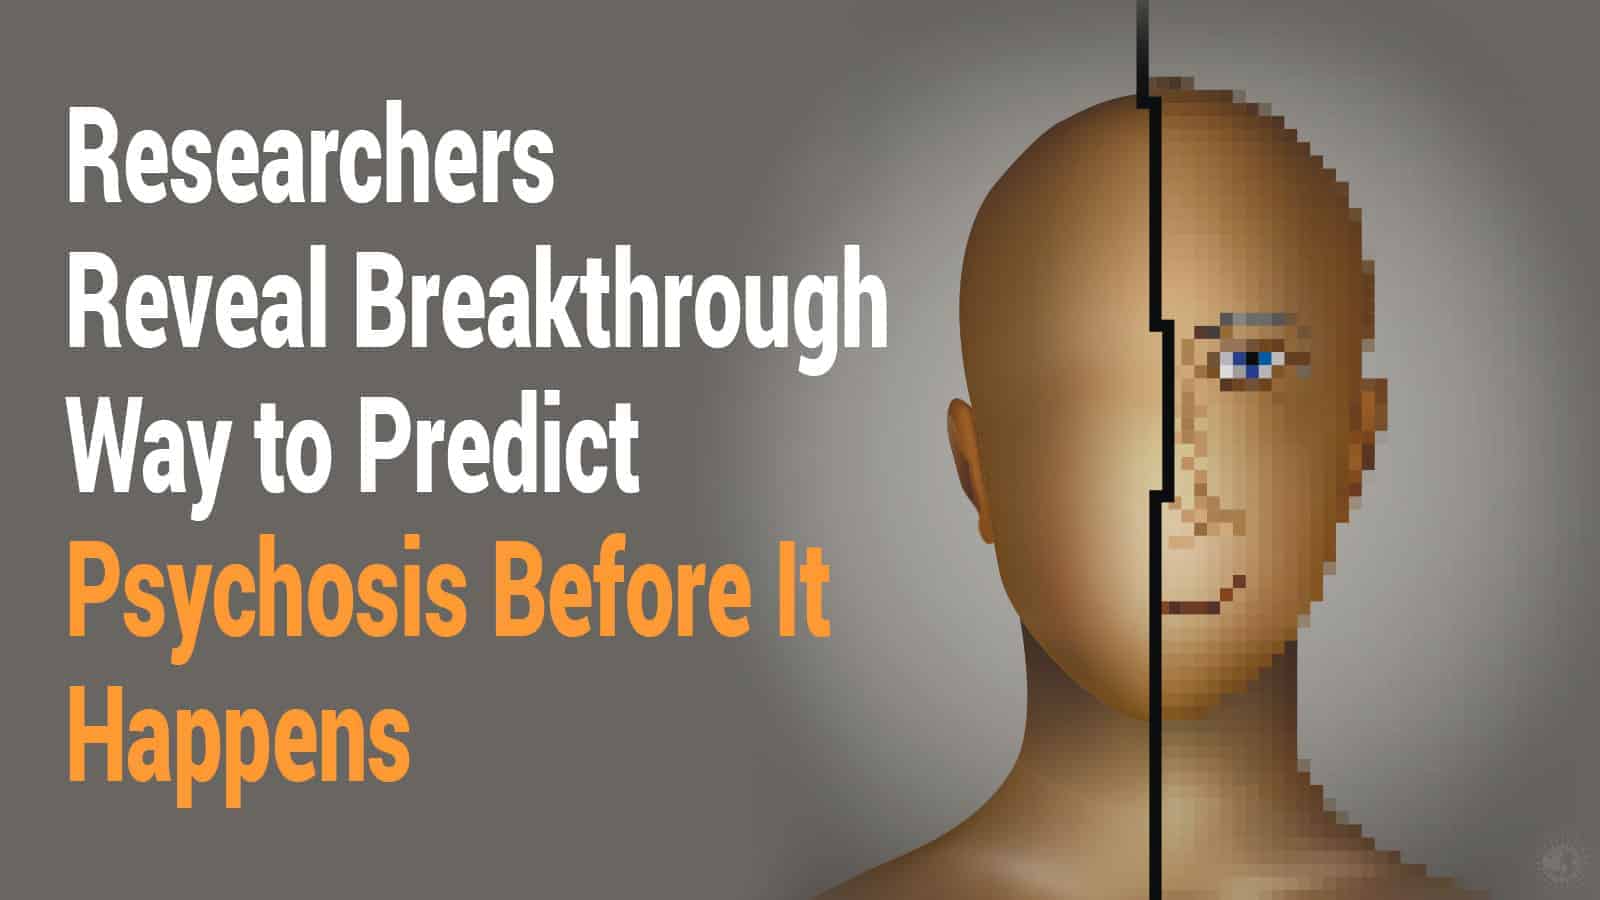 Researchers Reveal Breakthrough Way to Predict Psychosis Before It Happens